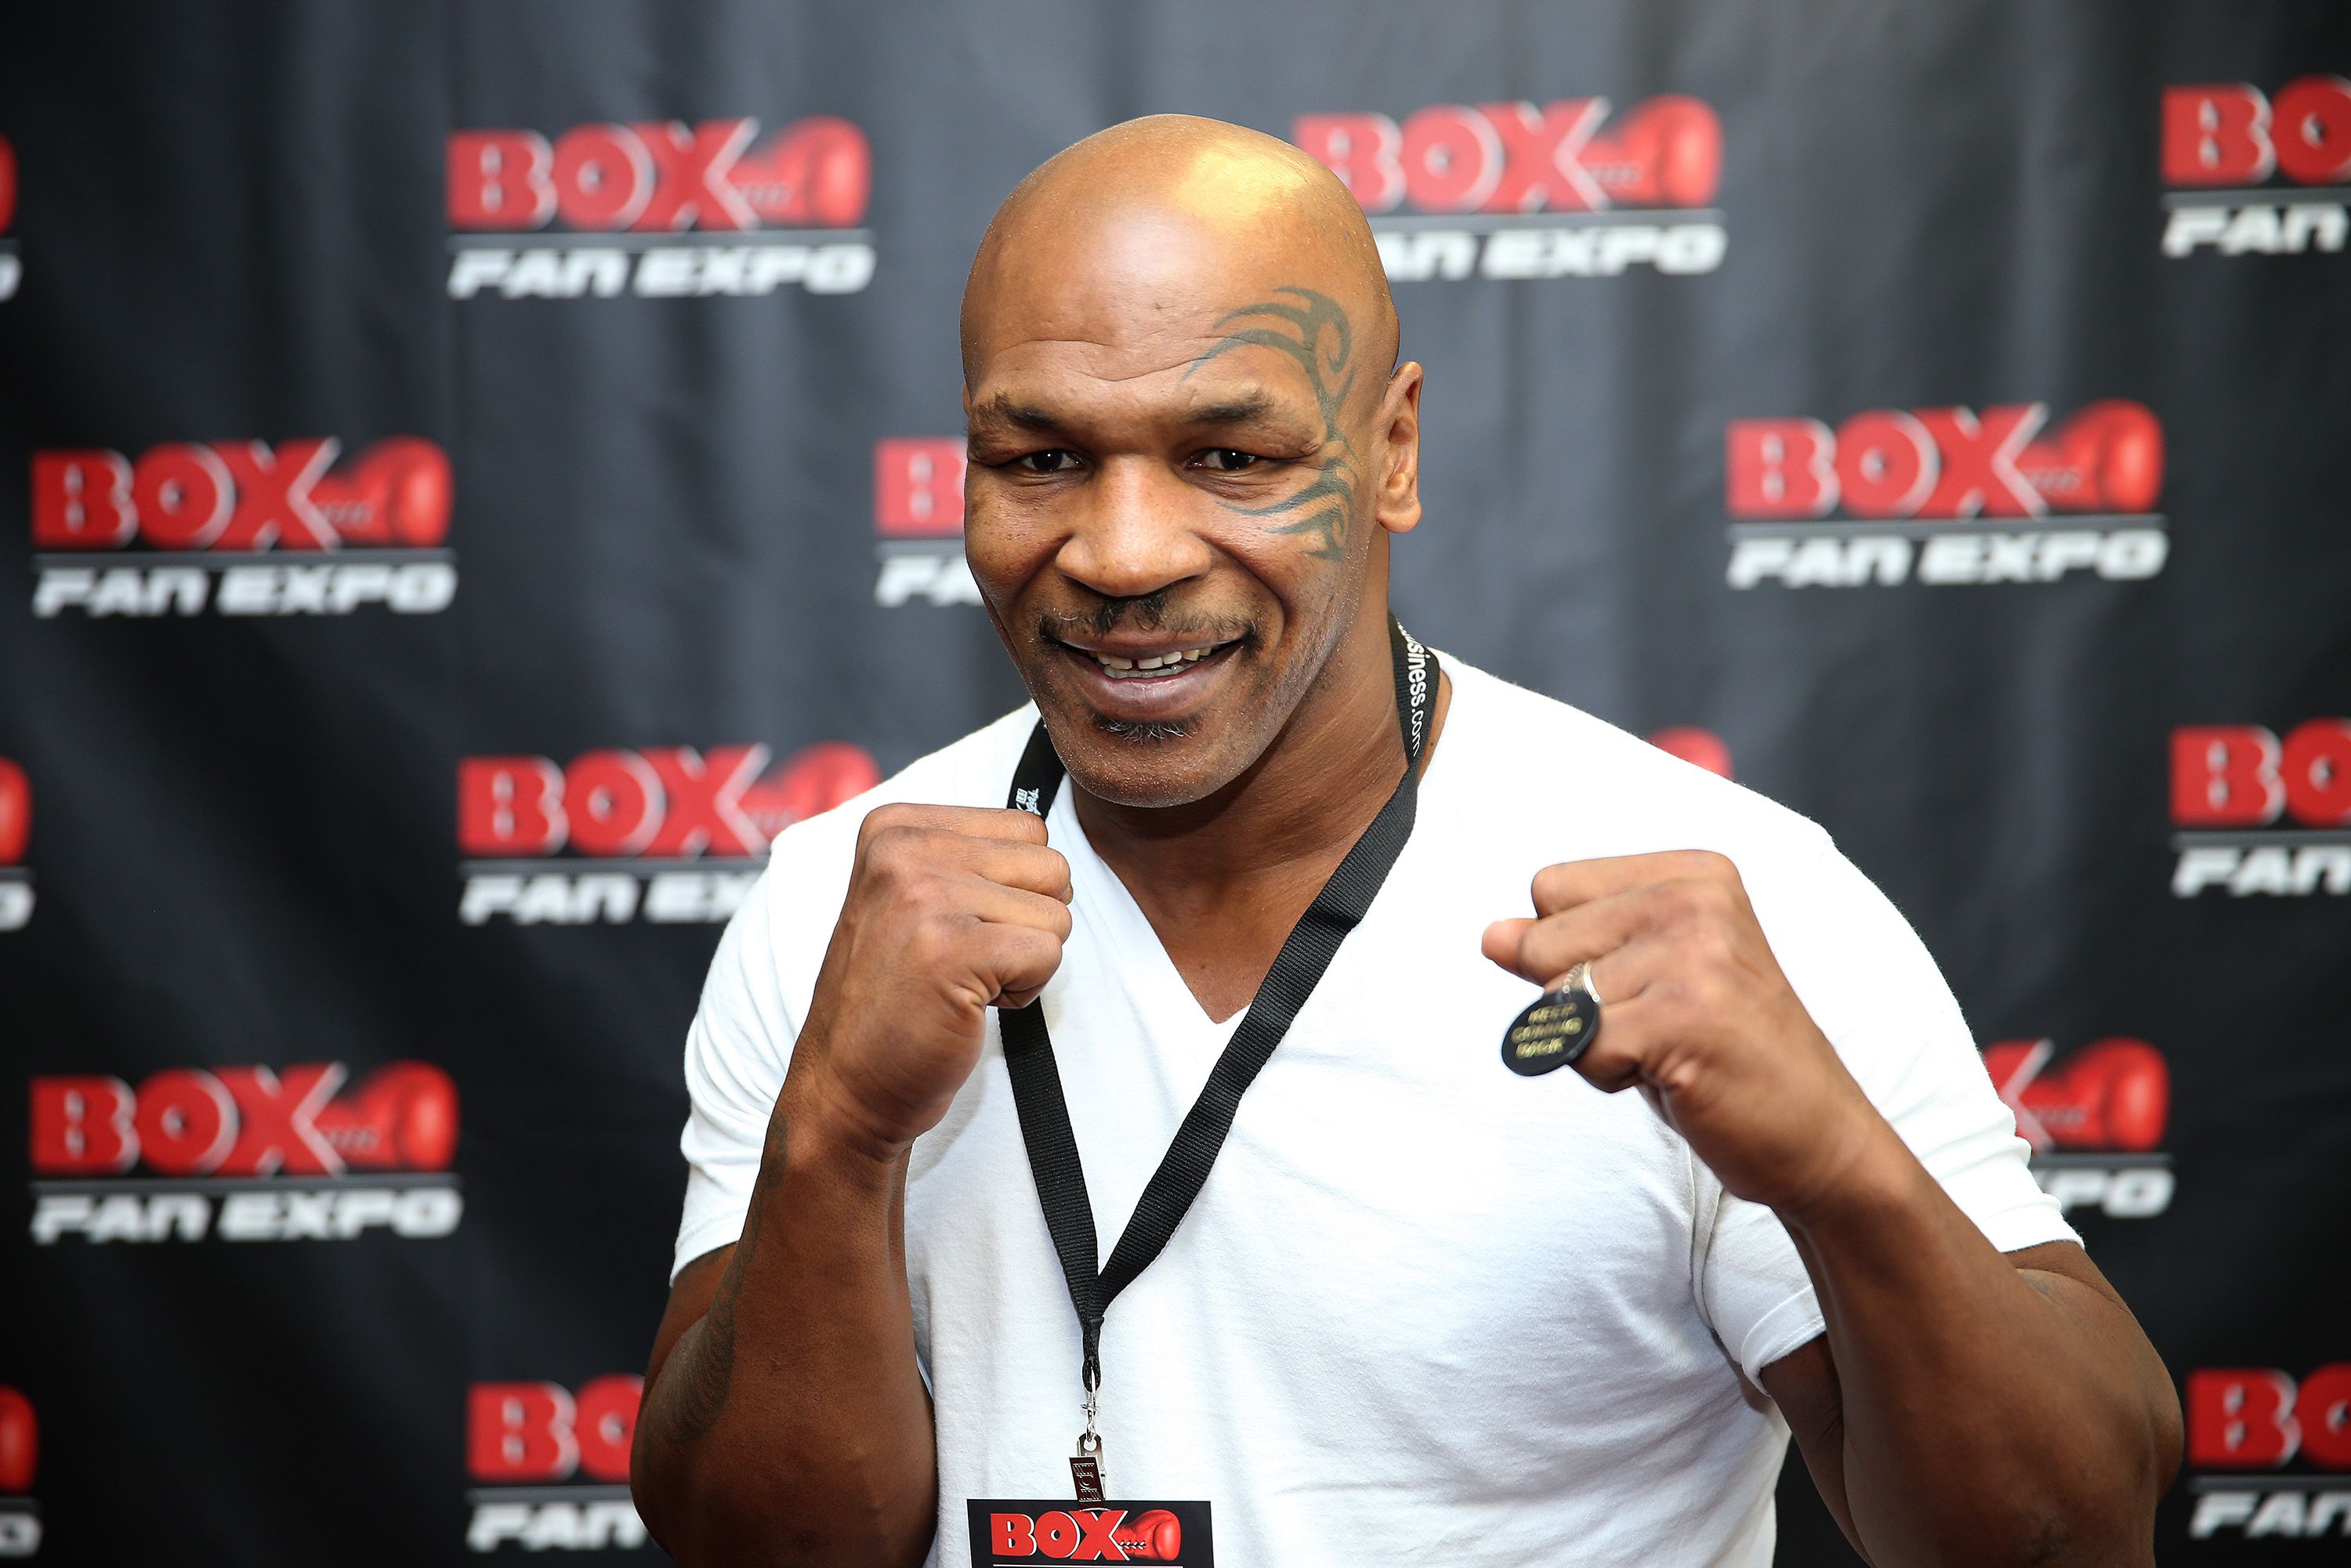 mike tyson punch out nintendo switch